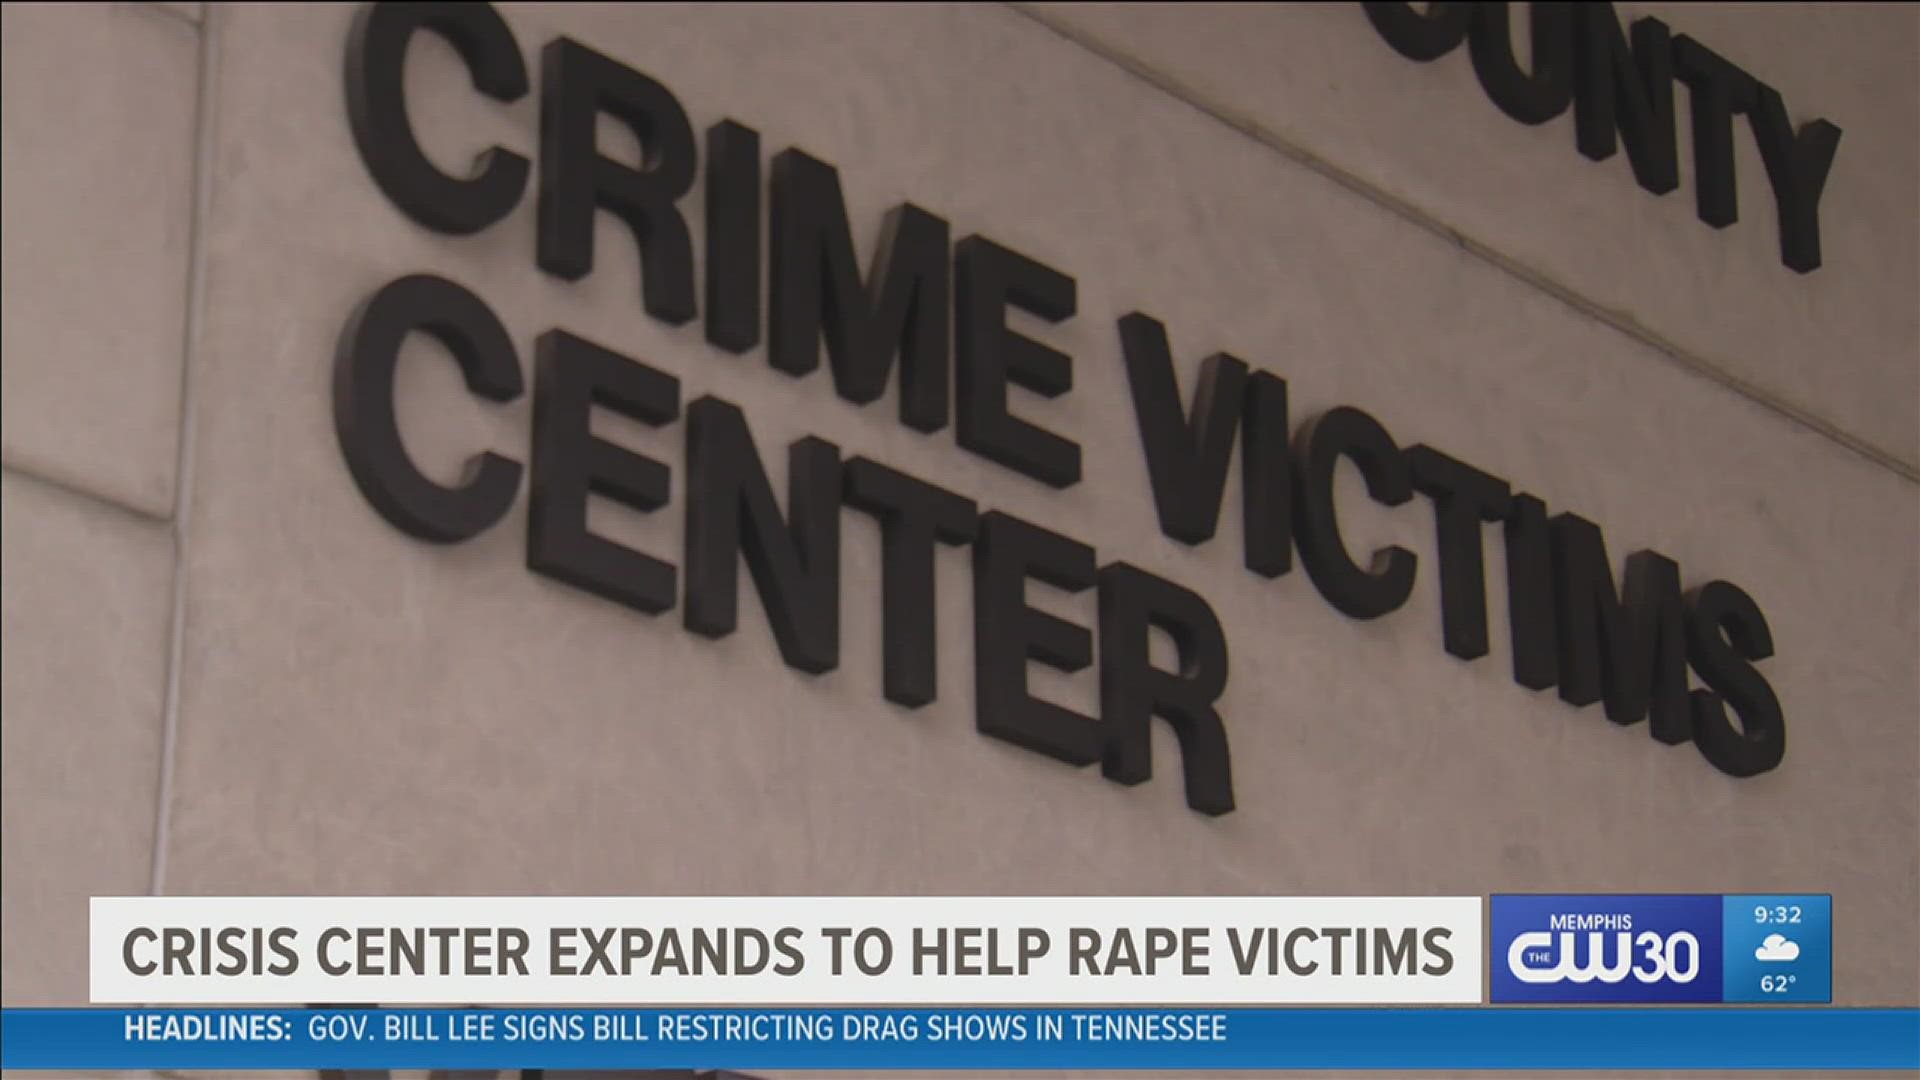 The expansion was announced Wednesday, March 1, just one day before the final hearing where rape victims accuse the City of Memphis for not testing 12,000 rape kits.